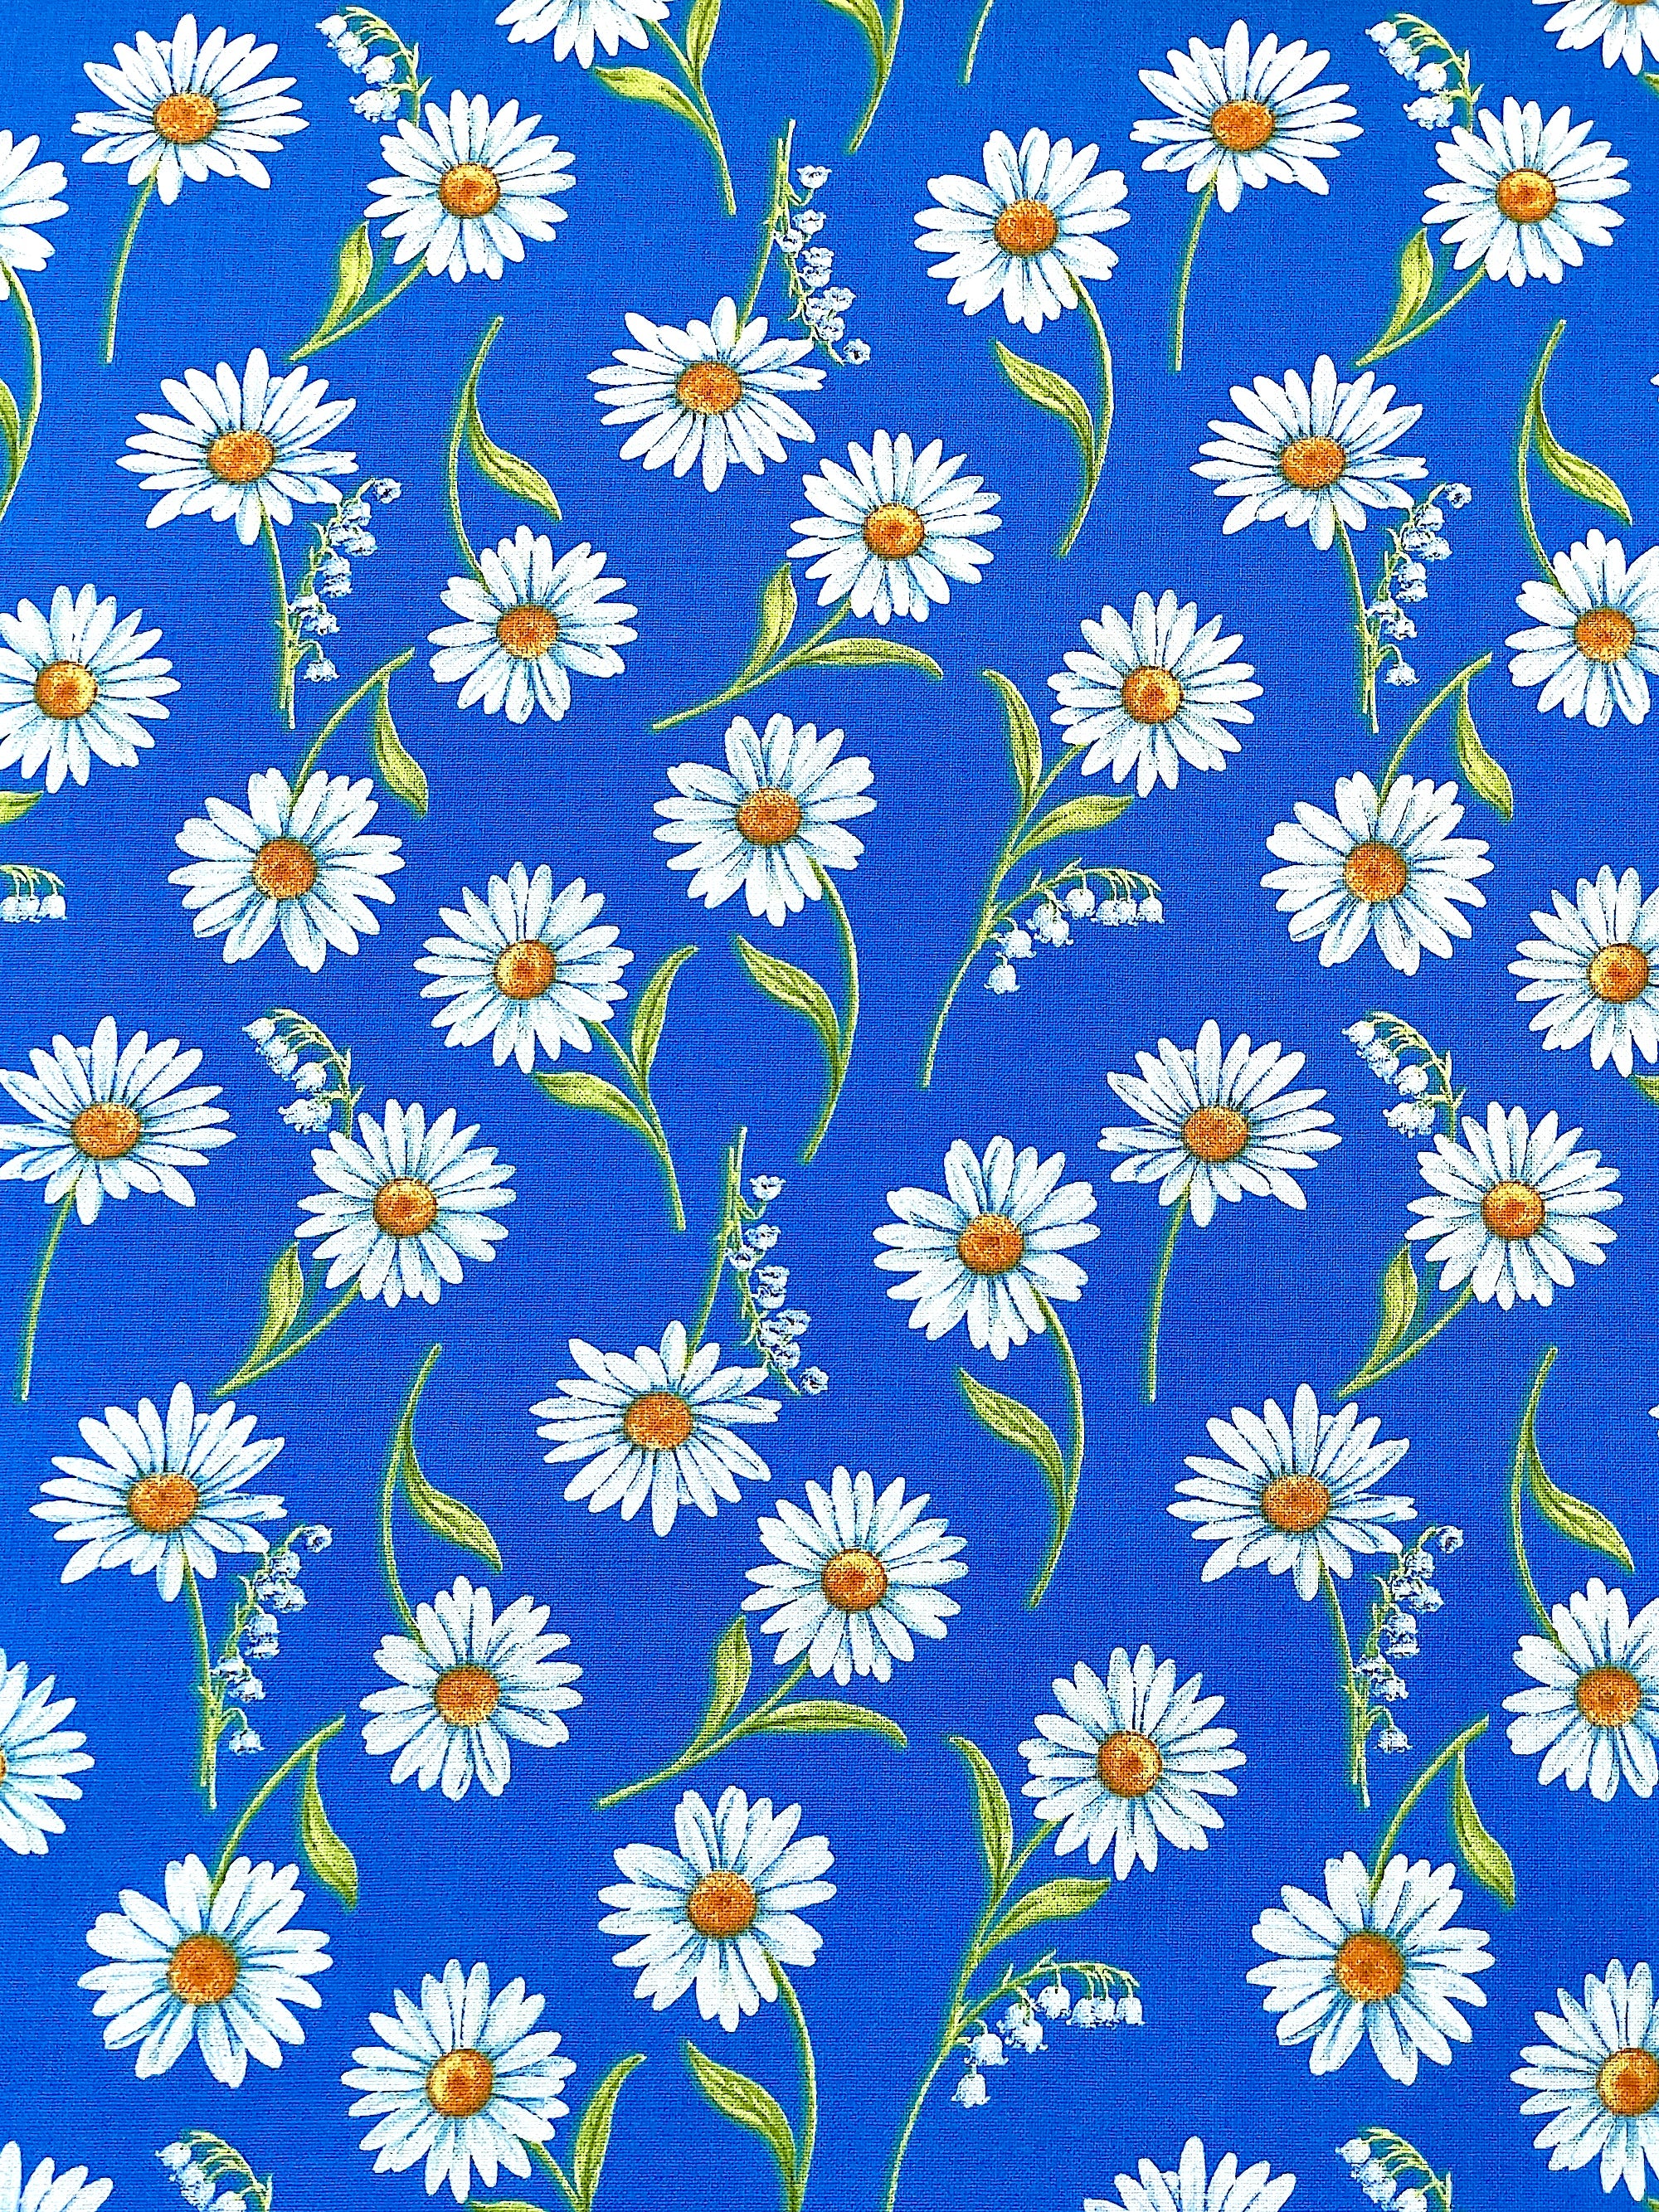 This cotton fabric is covered with white Daisies.&nbsp; This fabric is part of the Blue &amp; White Elegance collection by Benartex.